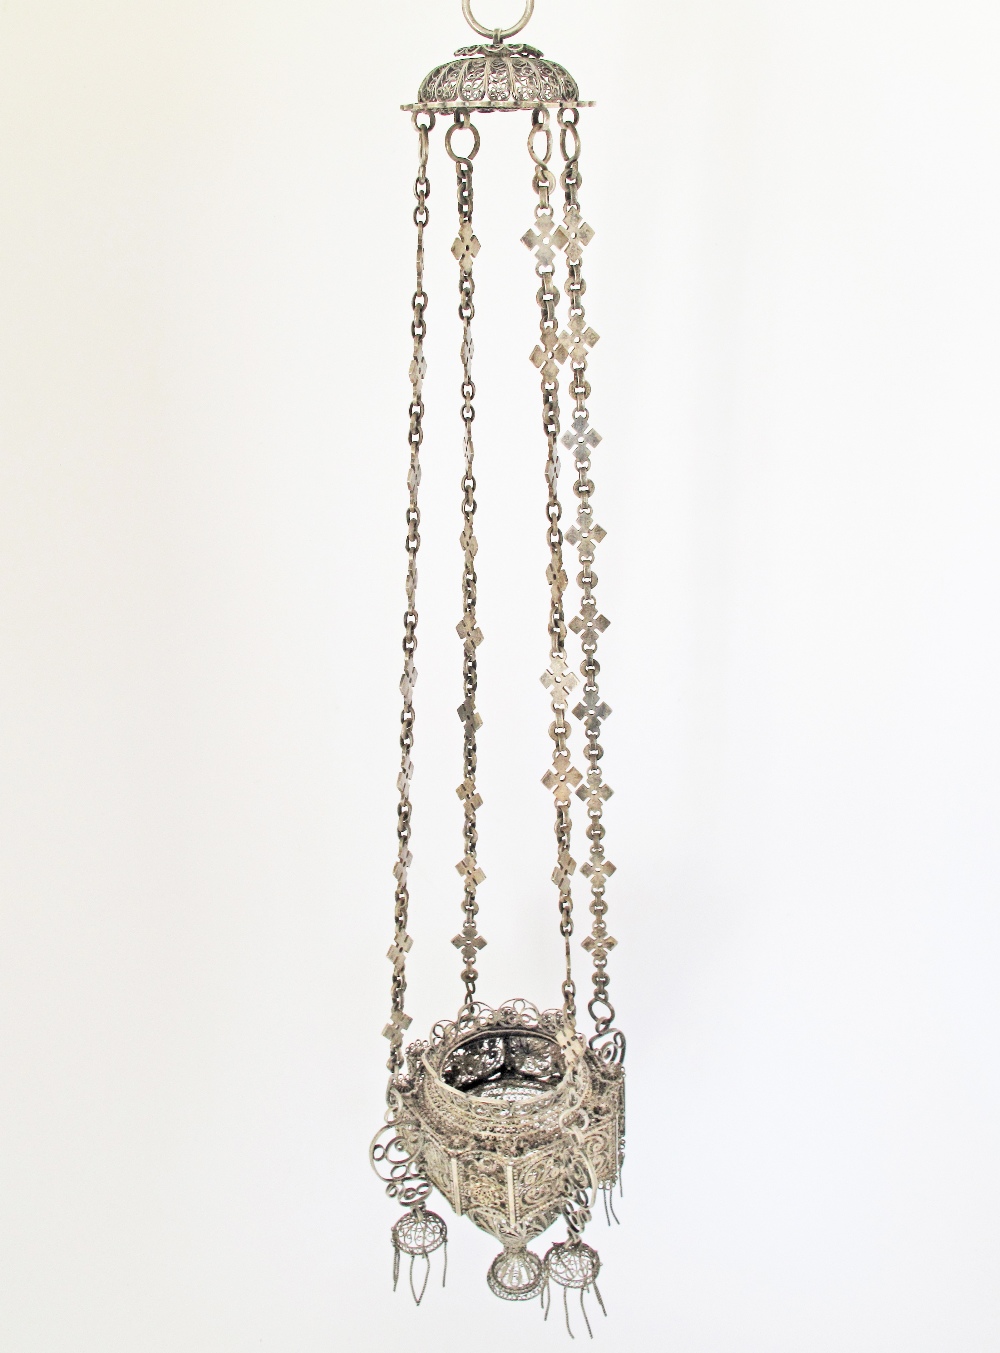 An Orthodox silver votive hanging lamp with filigree decoration. C18th / 19th century. H60cm, - Image 2 of 9